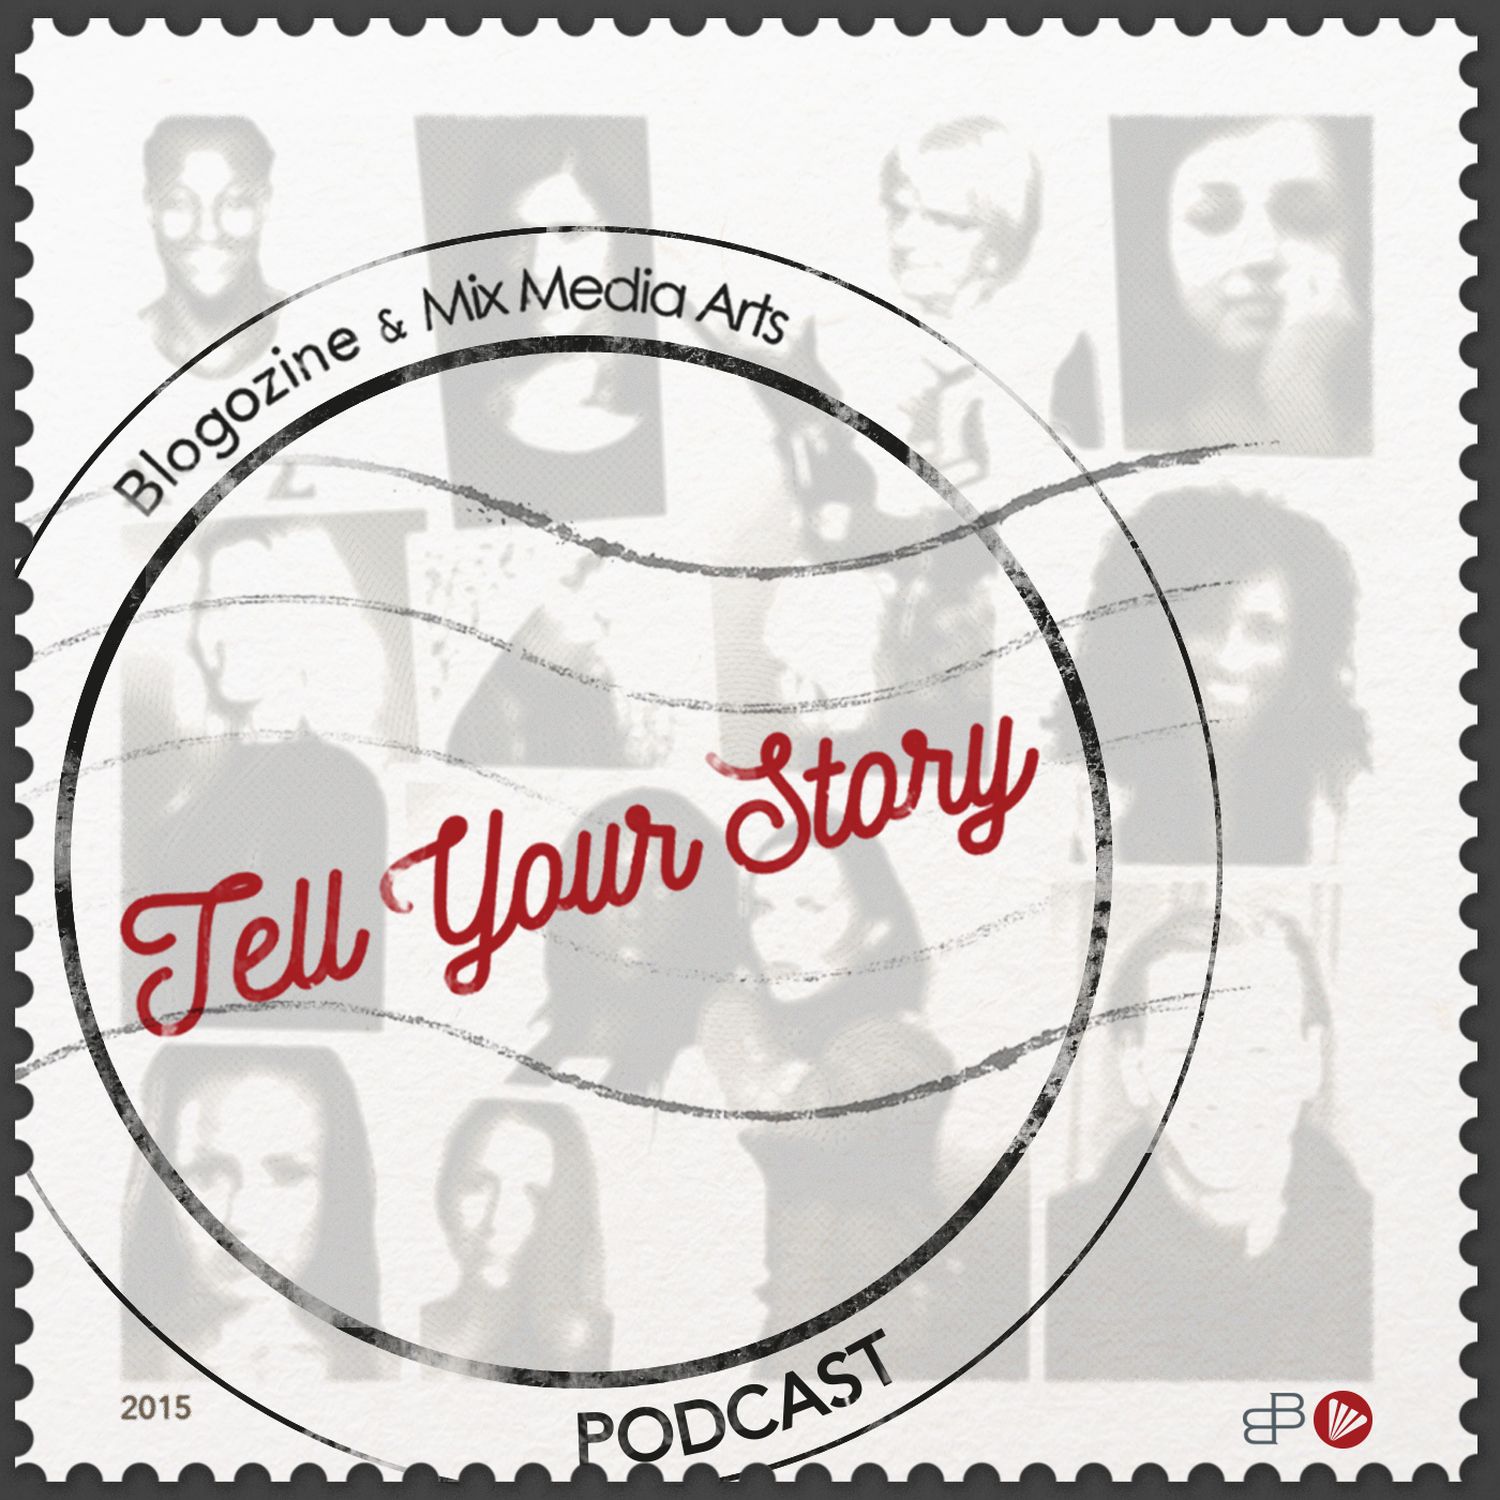 T.Y.S.T - Tell Your Story